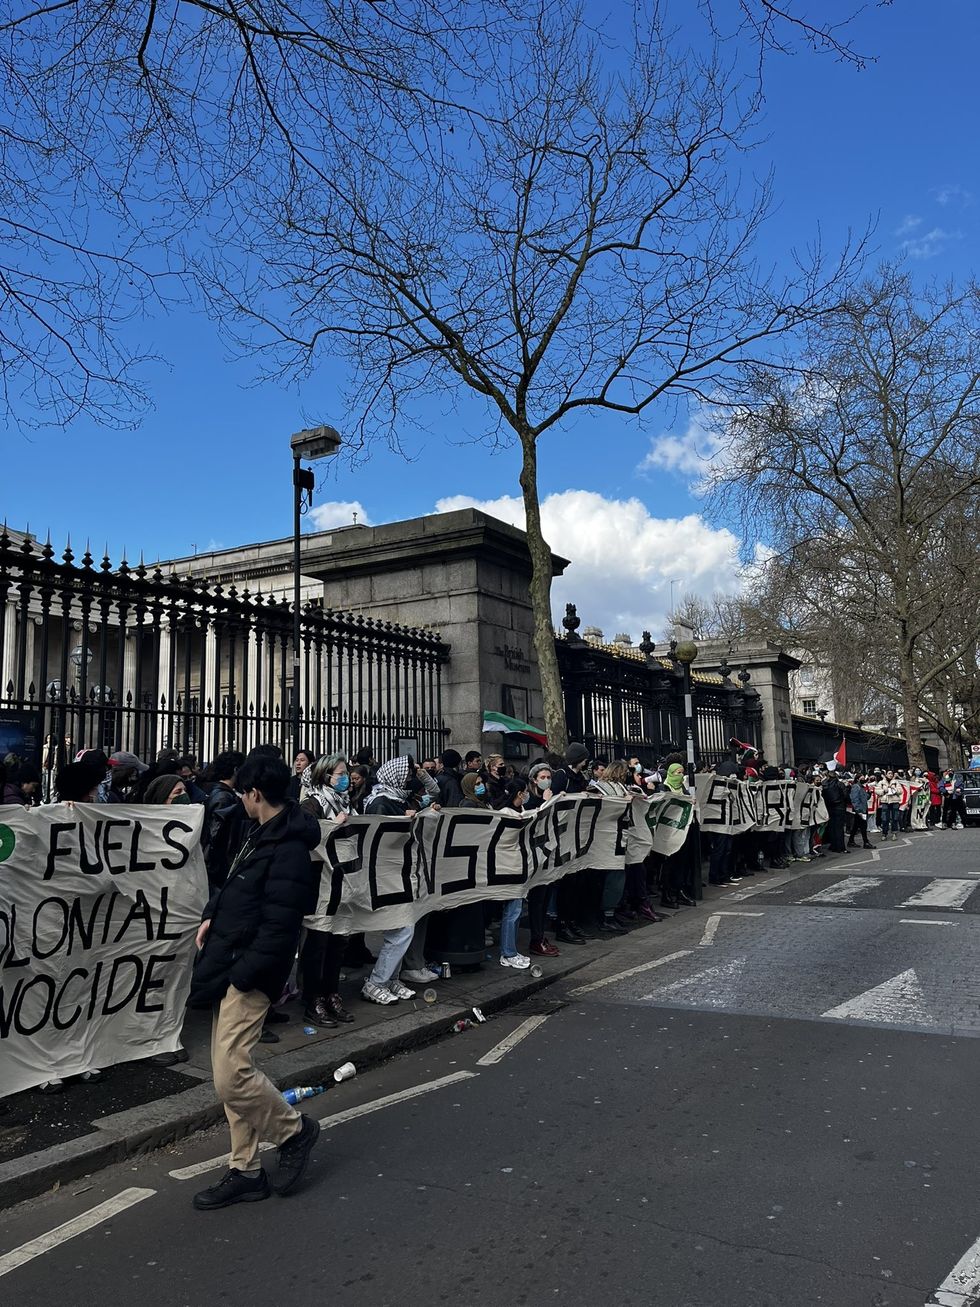 Protests outside the British Museum